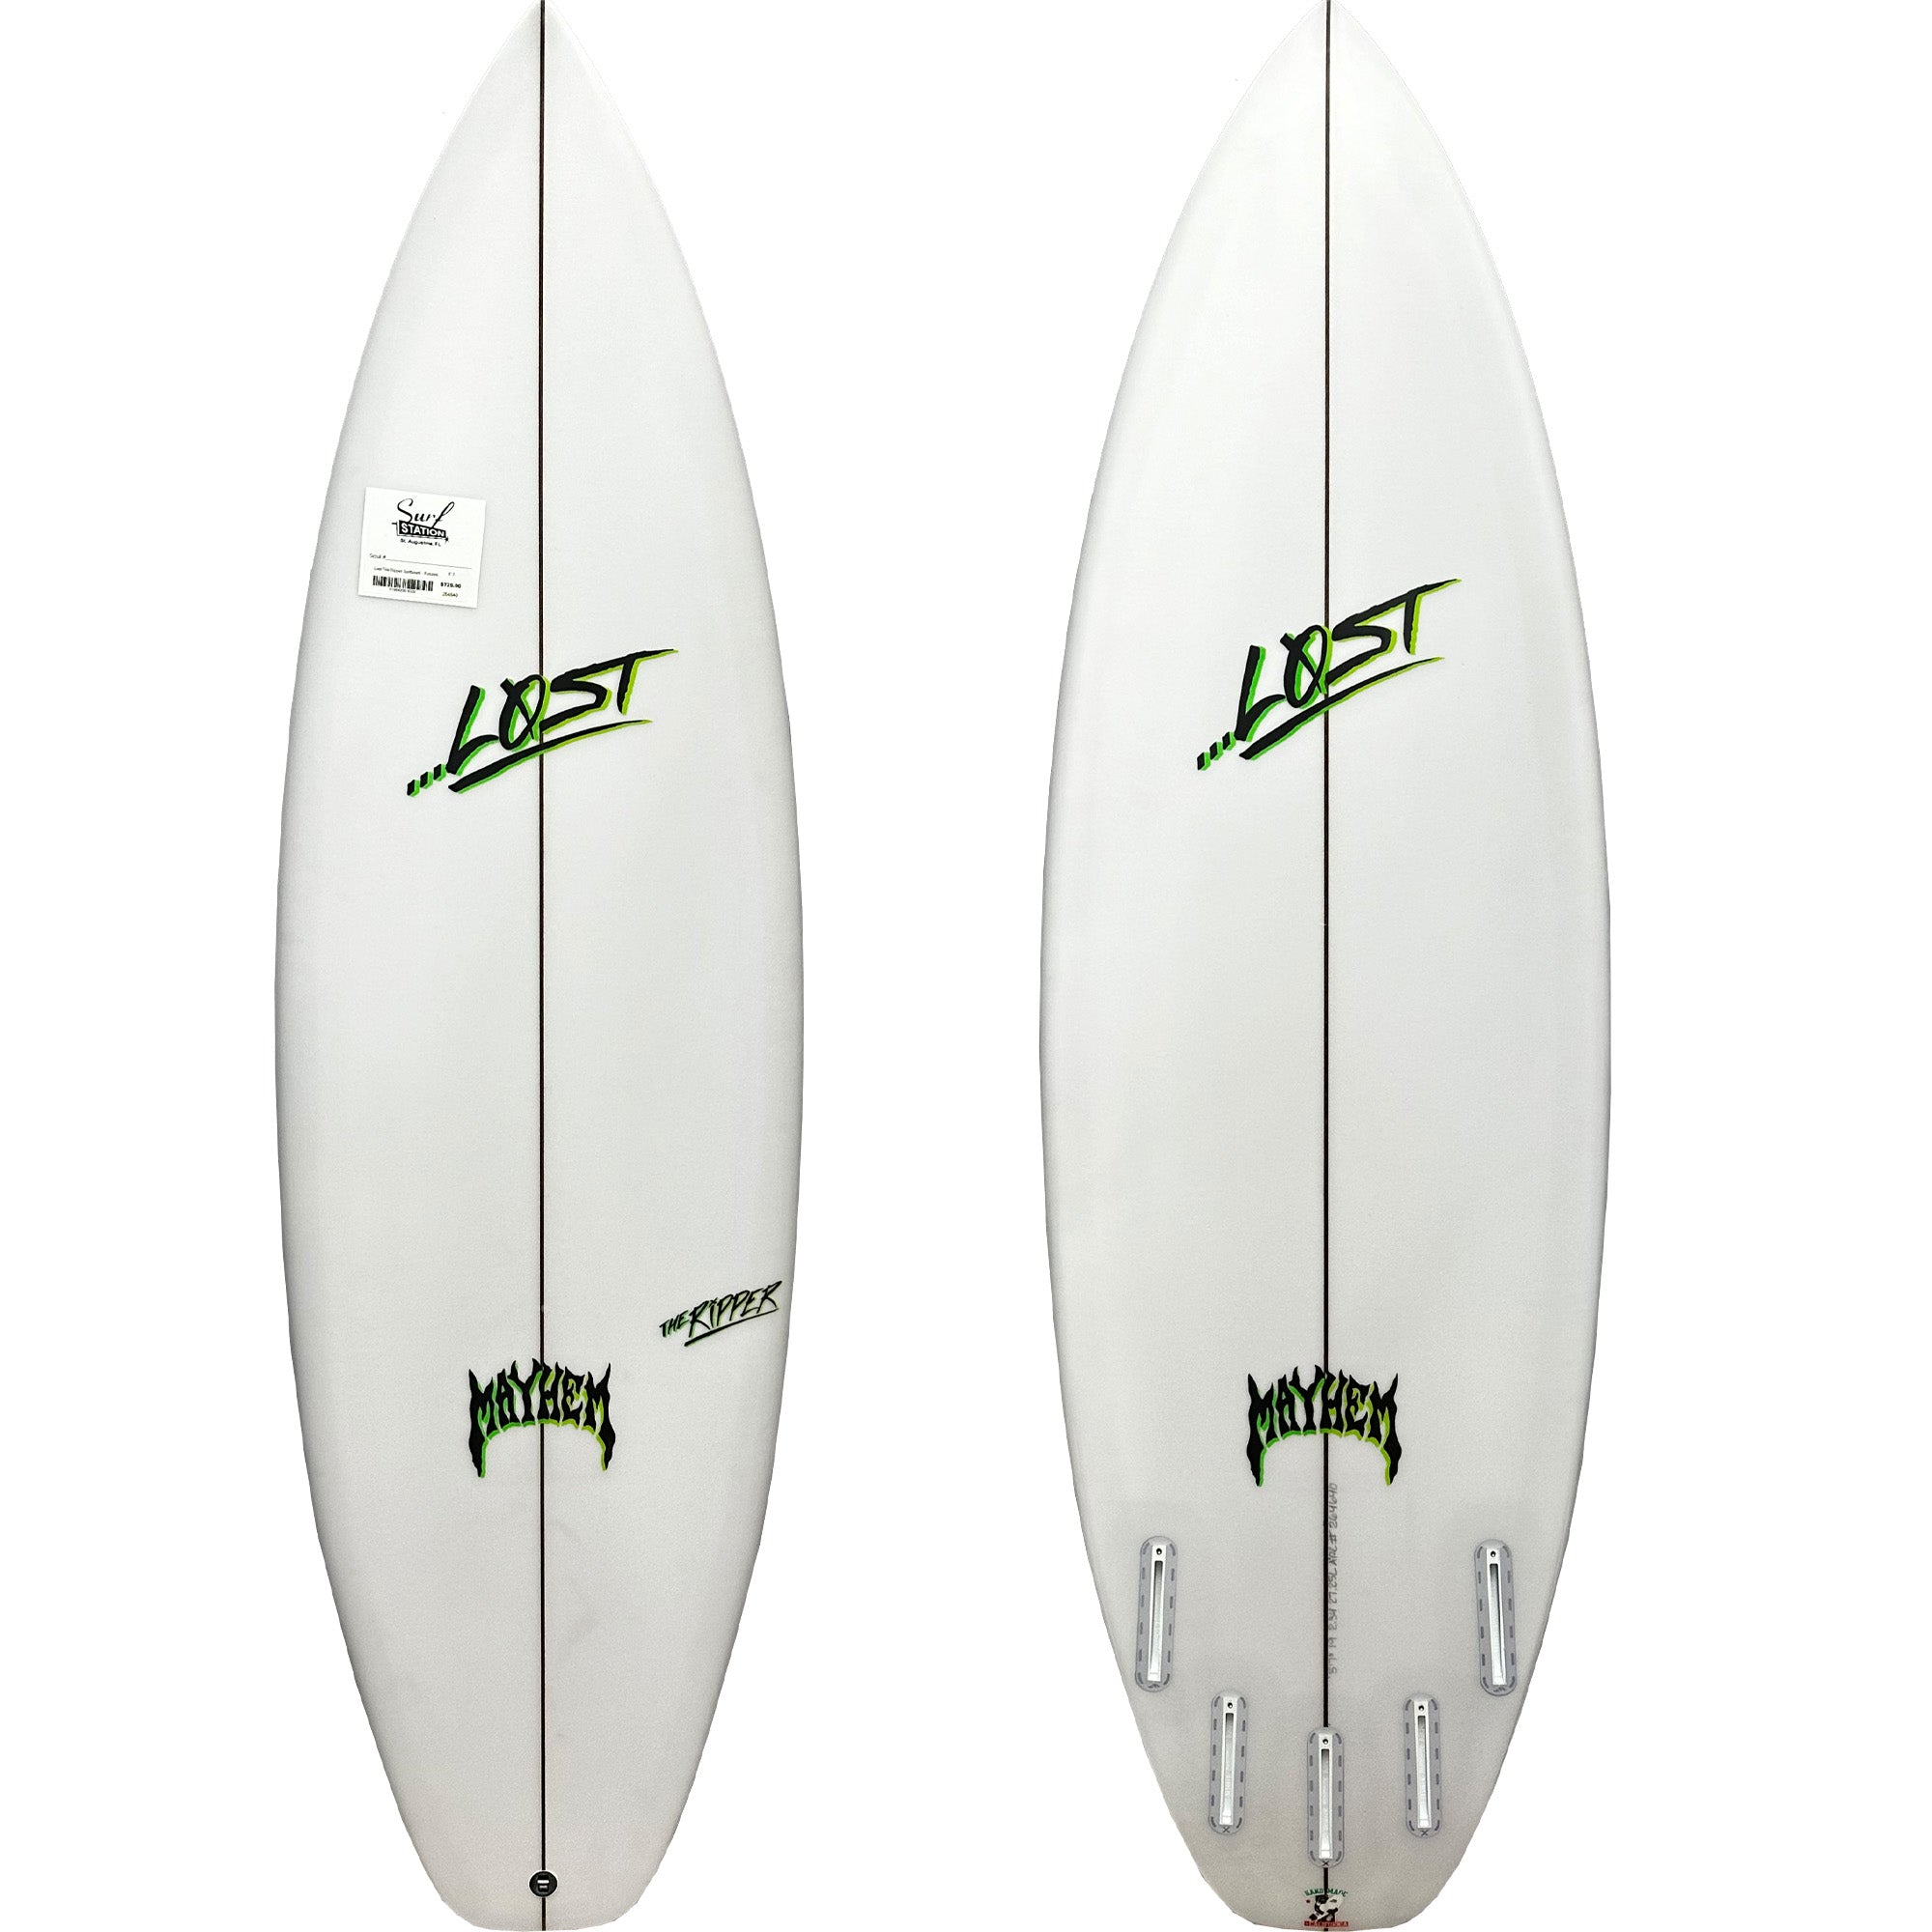 Lost The Ripper Surfboard - Futures